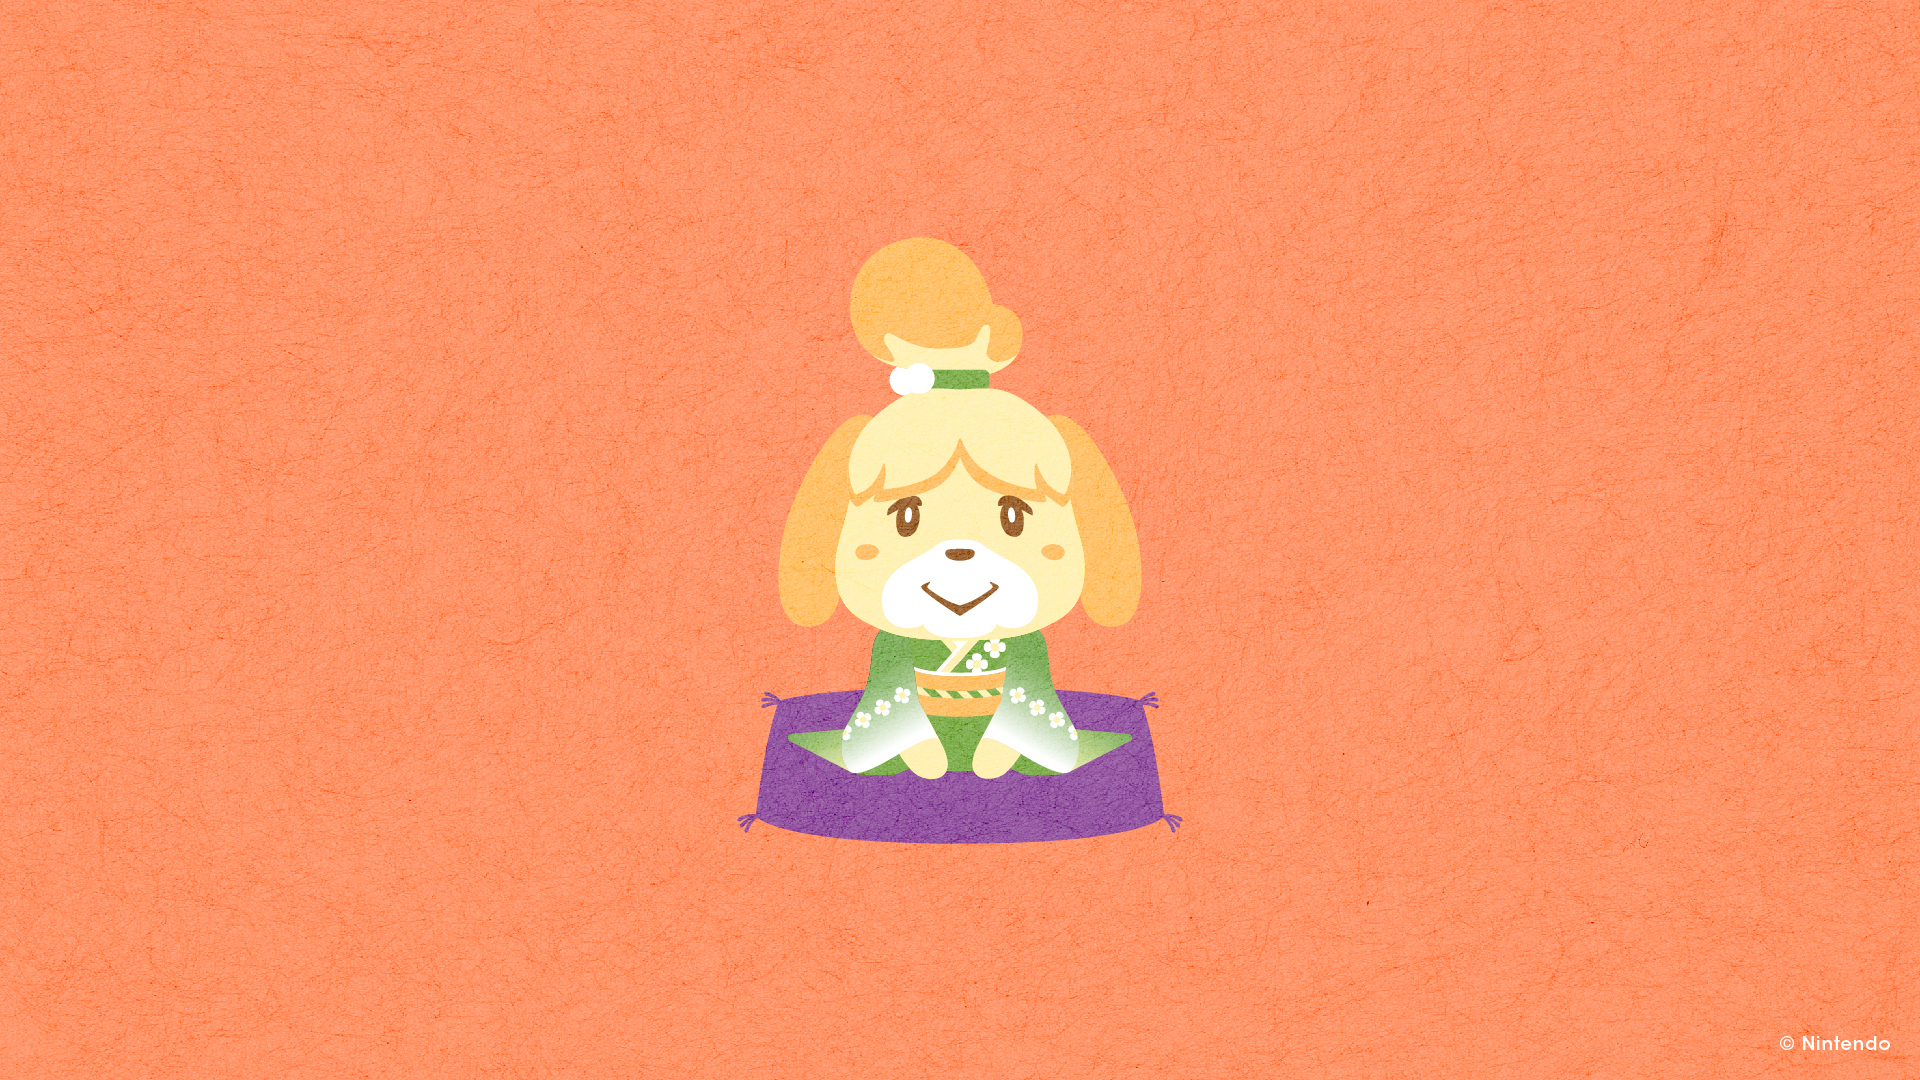 Isabelle Animal Crossing Wallpapers